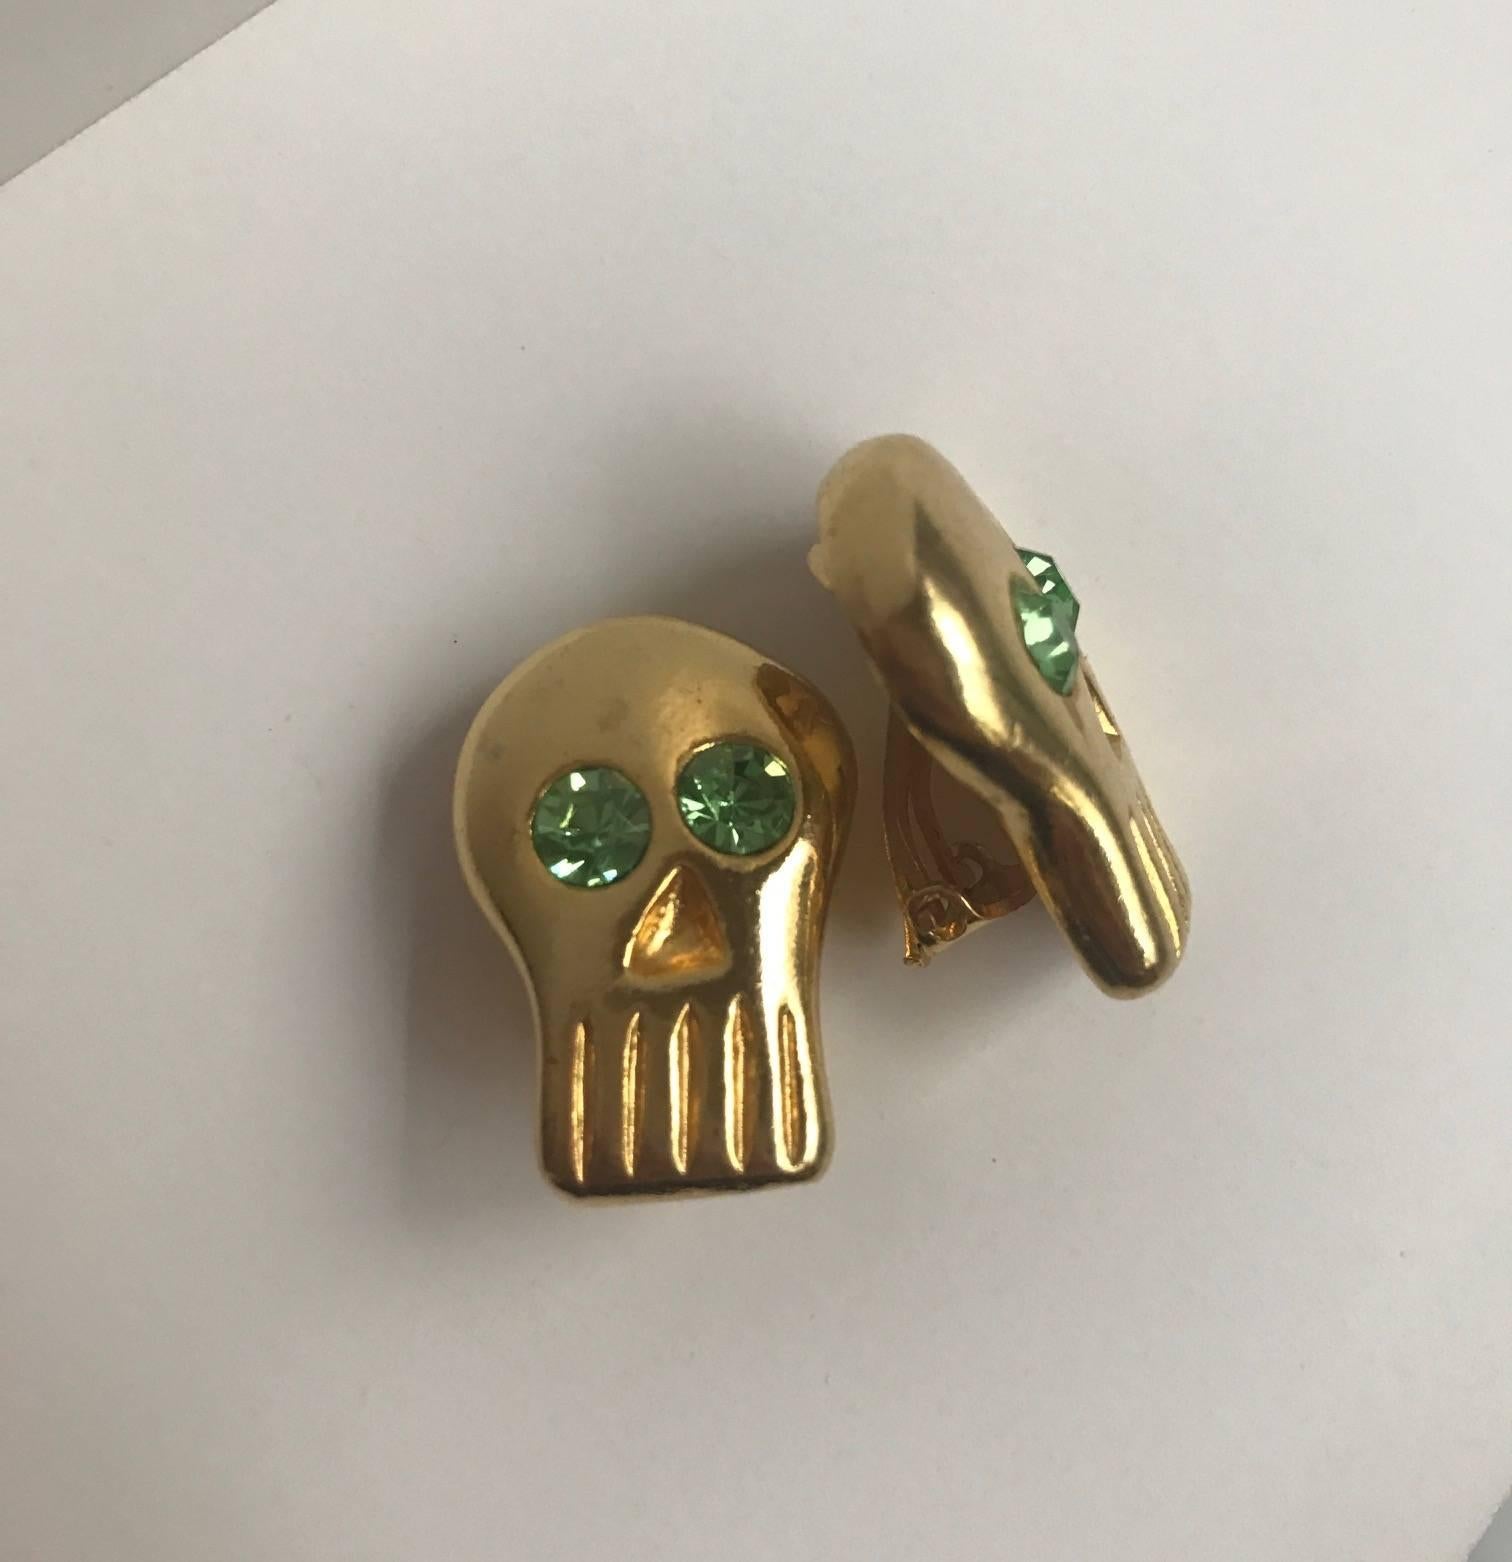 BillyBoy* Surreal Bijoux 1989 gold tone clip on skull earrings with green crystal eyes. Each piece of BillyBoy*'s costume jewelry was superbly individually crafted, and these are a wonderful example of his creative work! 

Approximately 1 1/8